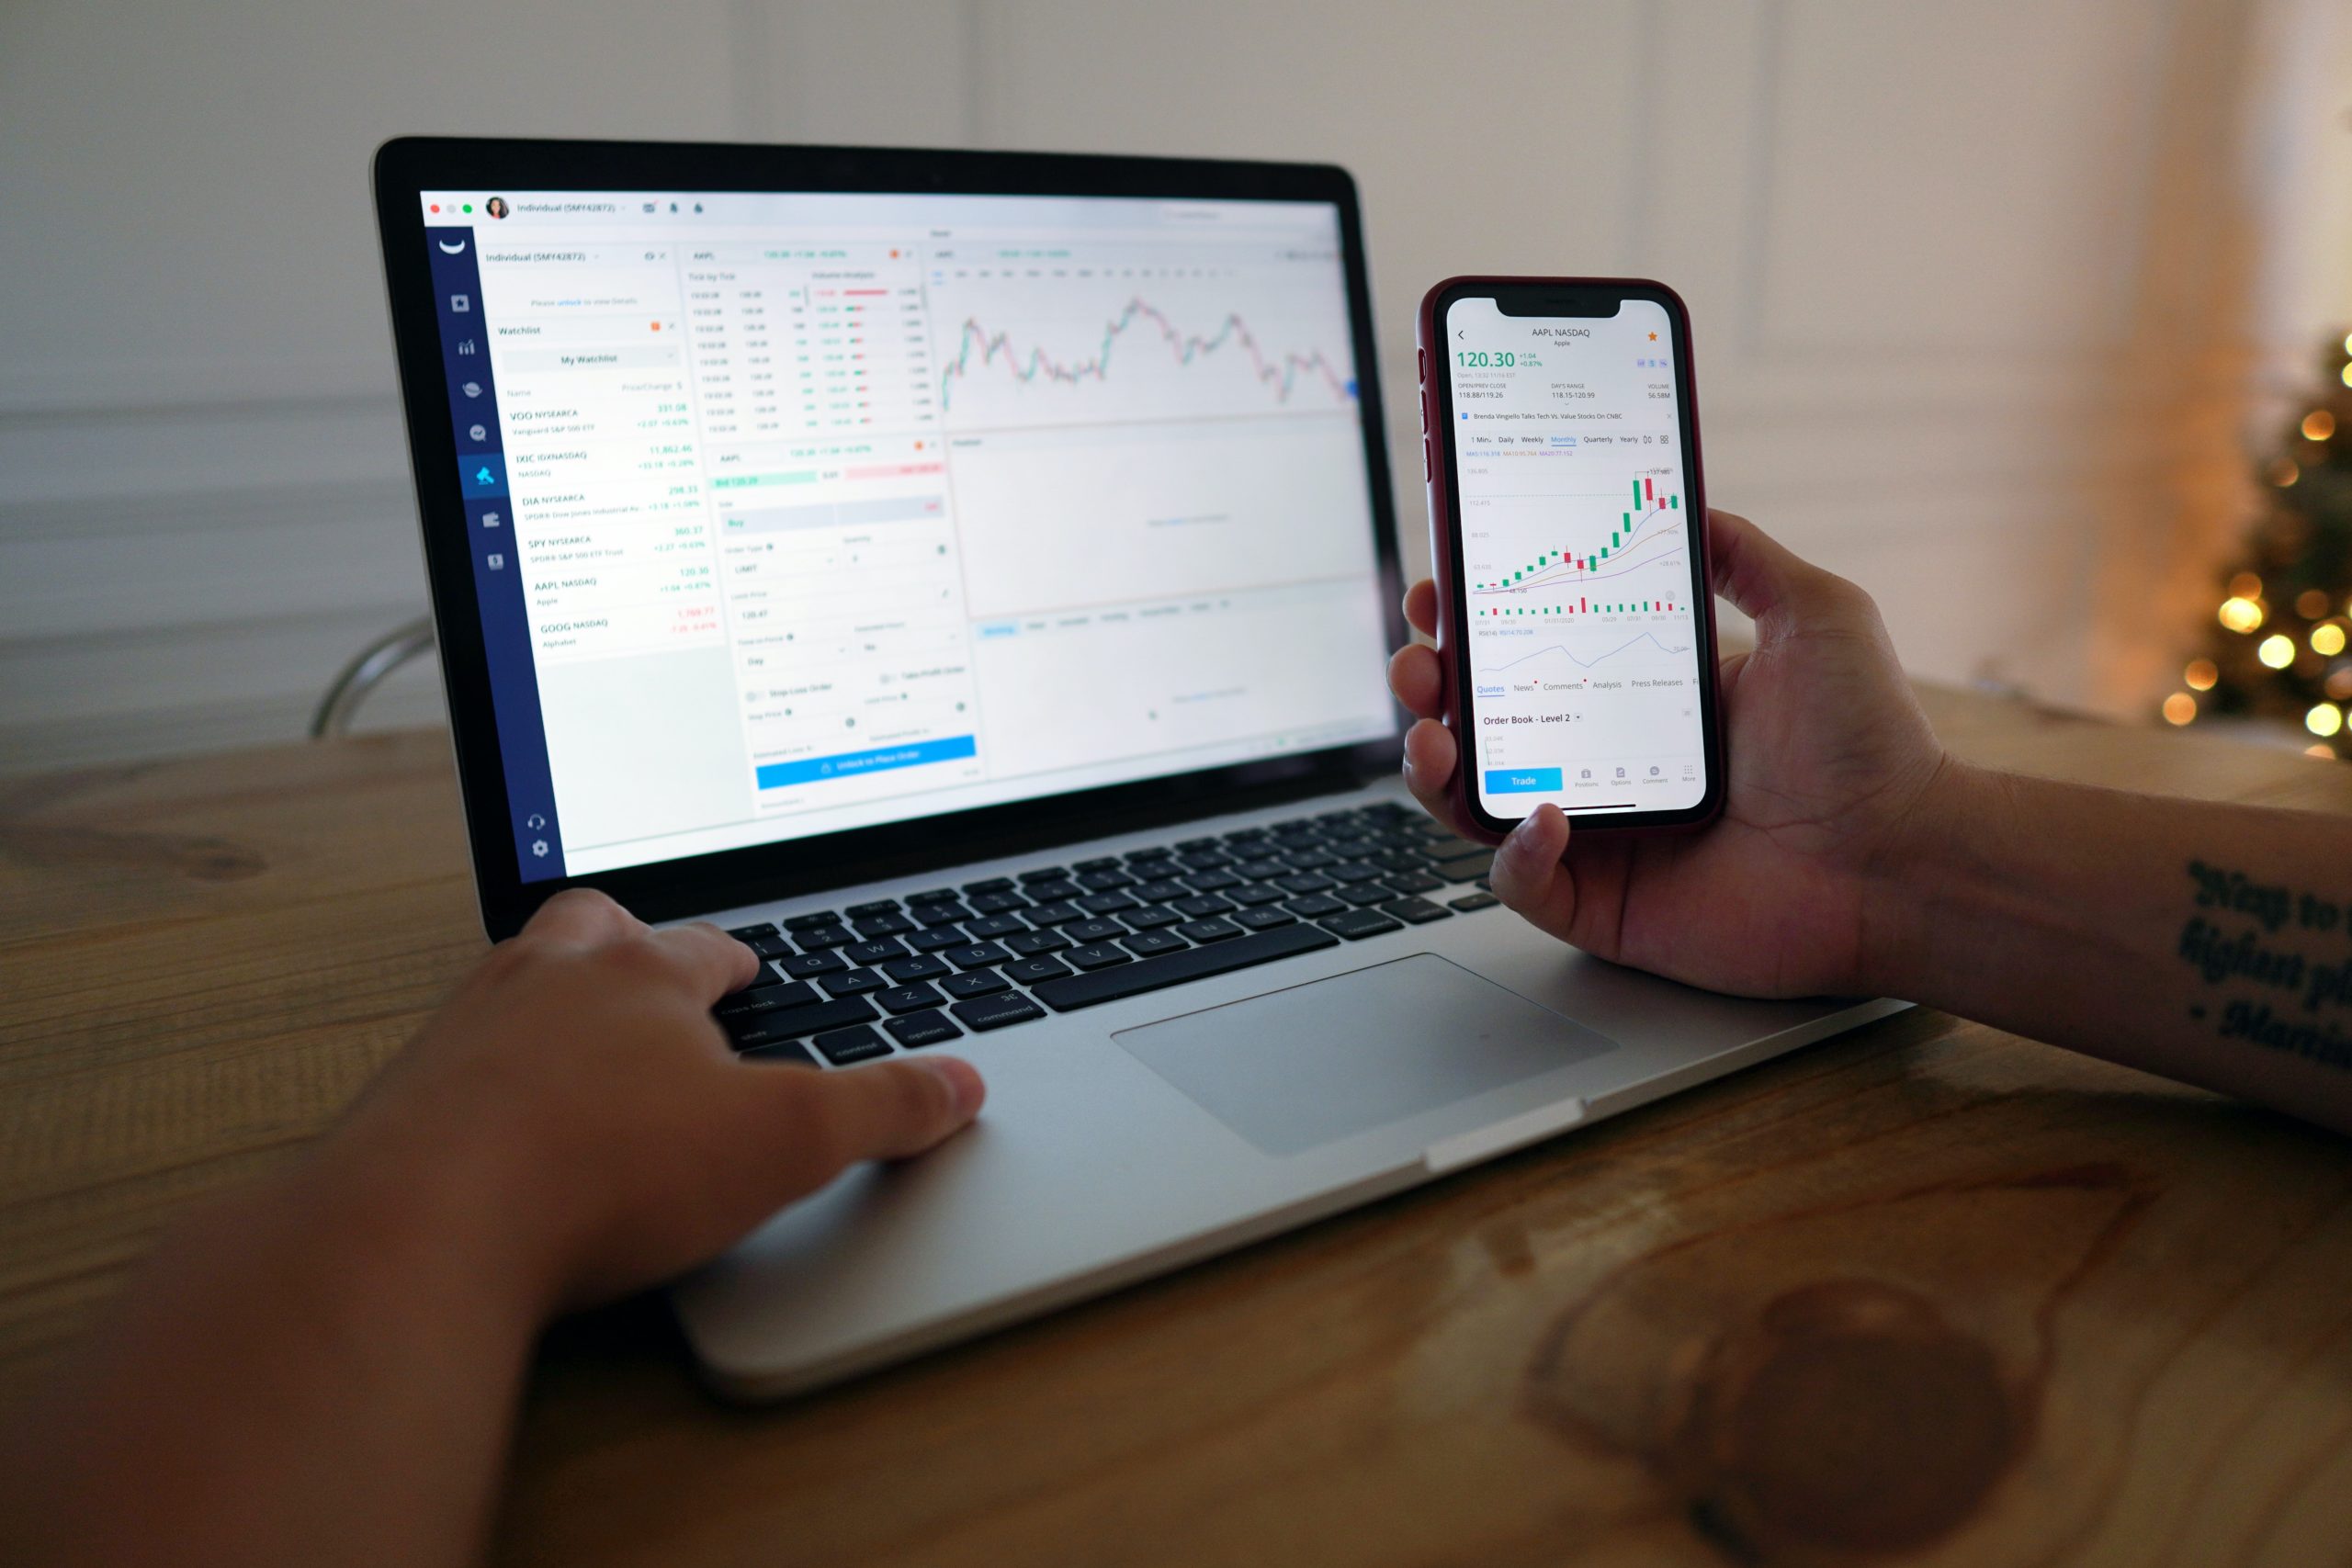 What is Day Trading?